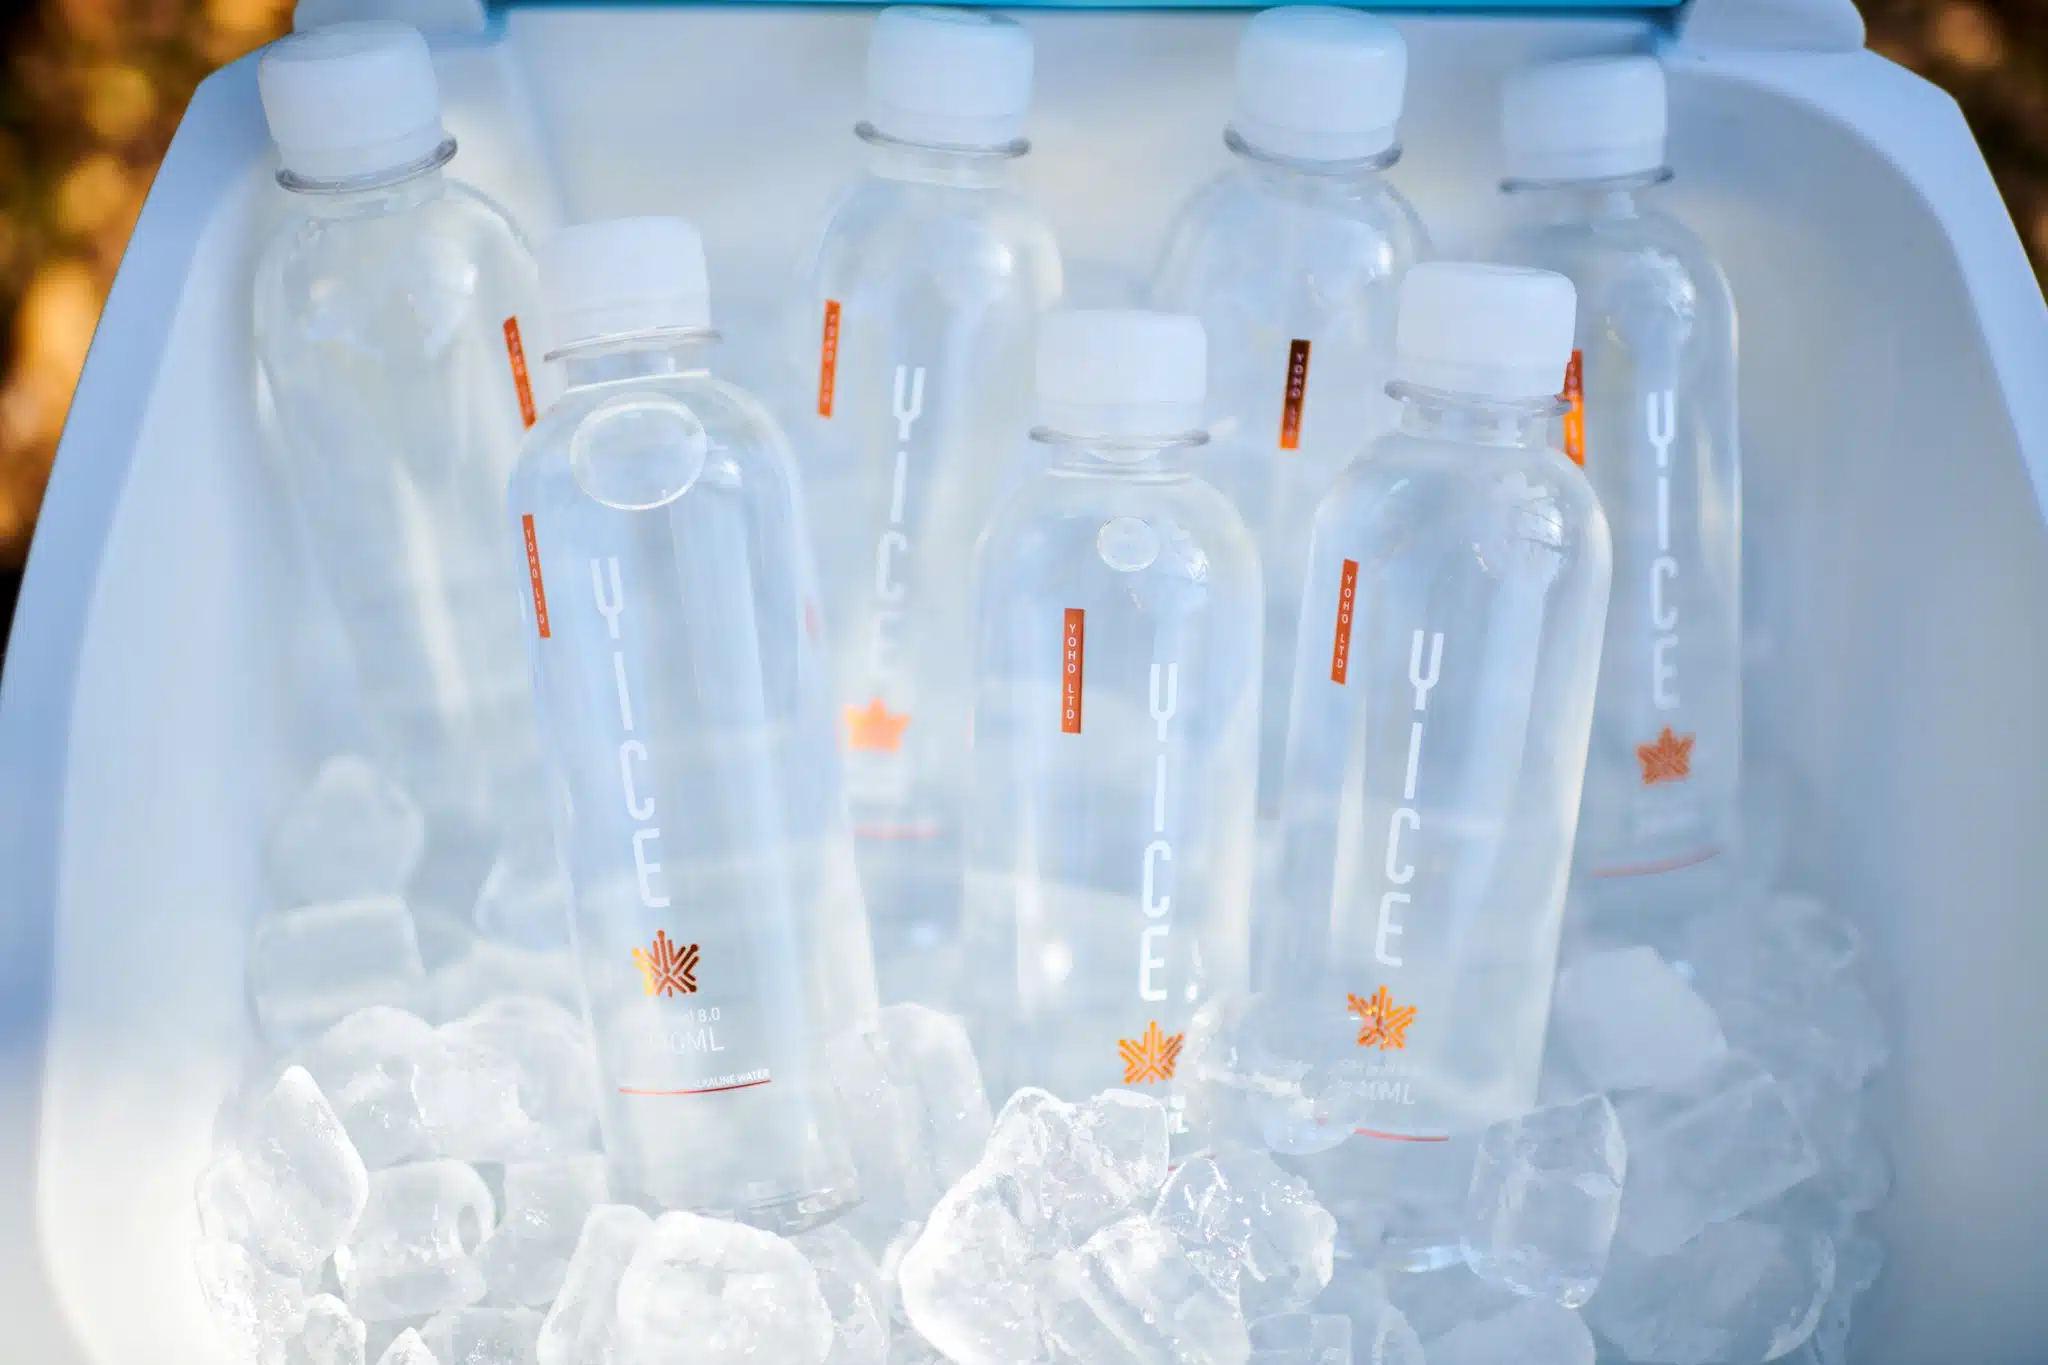 Multiple bottles of water staged in cooler on ice.